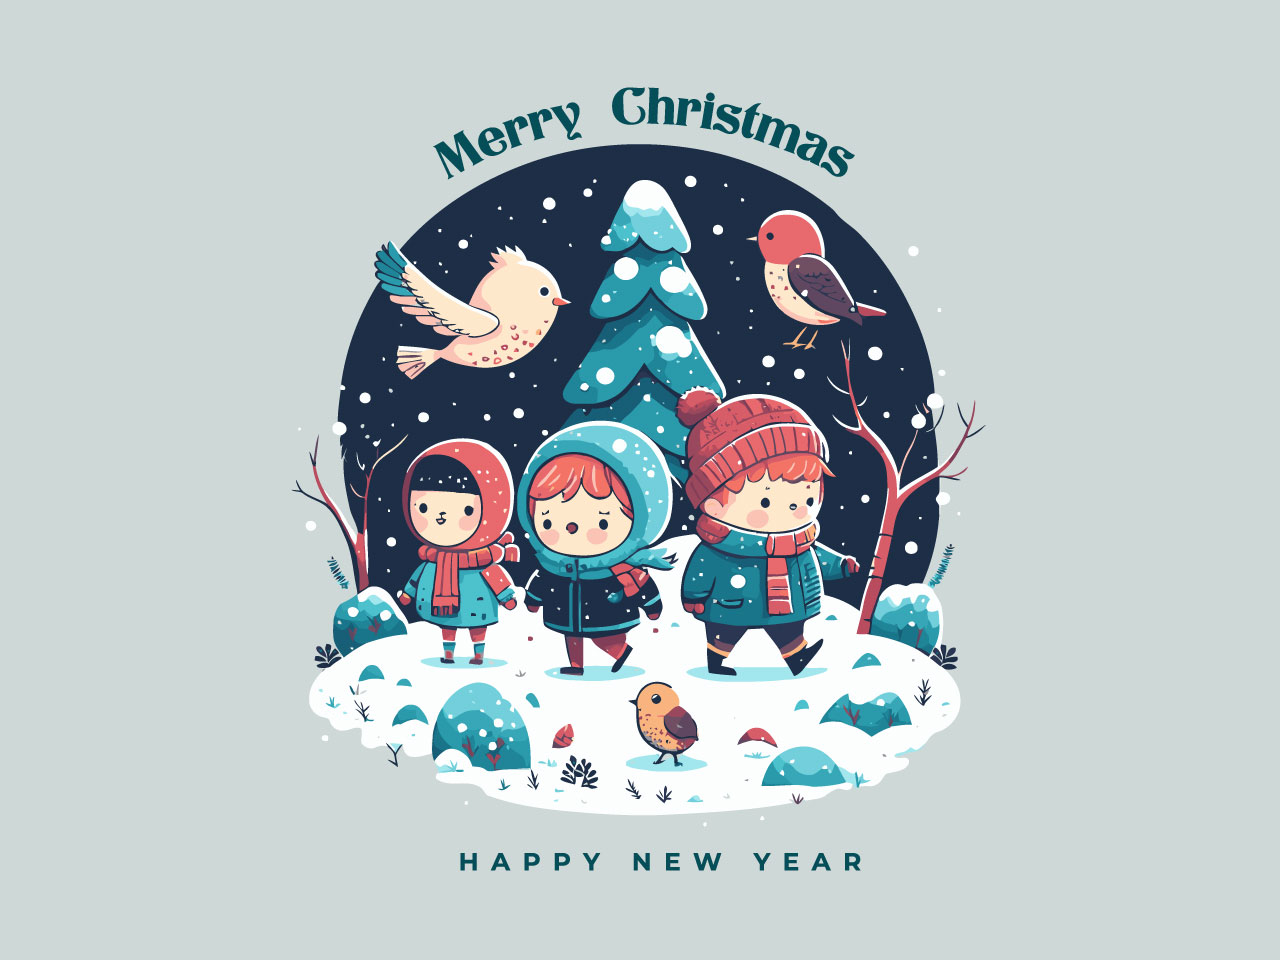 Merry christmas happy new year greetings invitation card